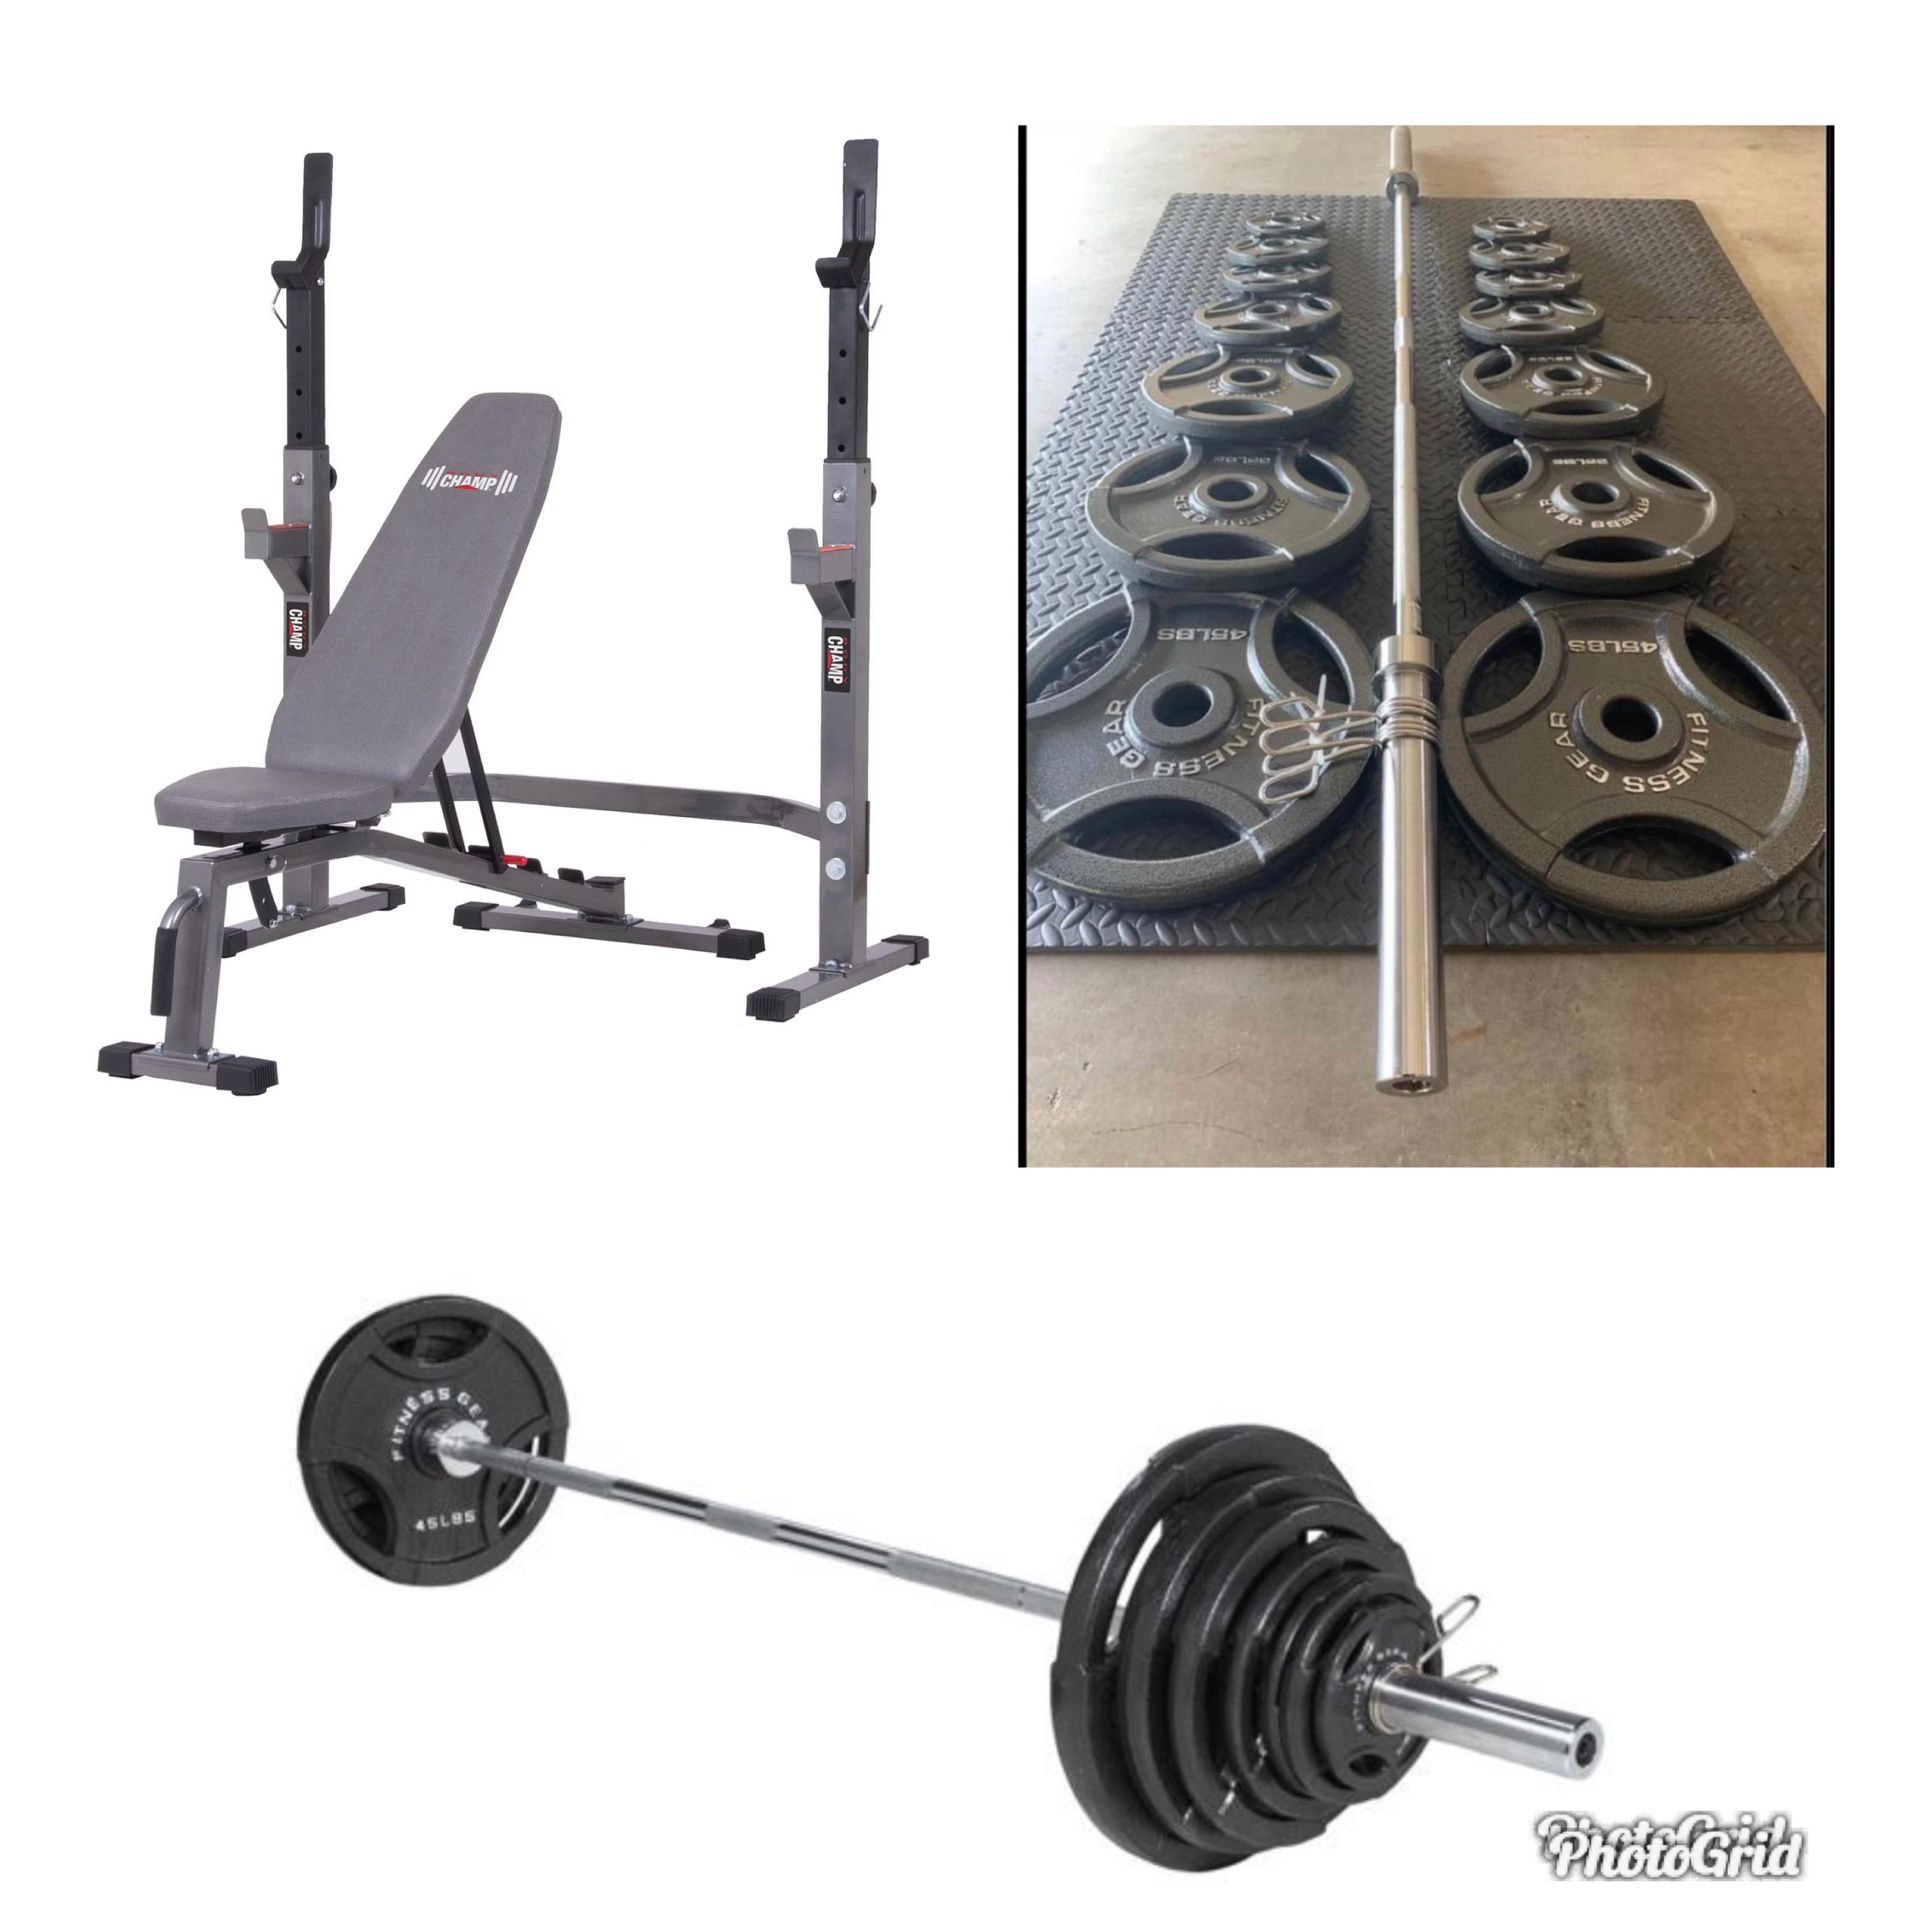 Full Home Gym - Bench Squat 300 LB Olympic 2” Barbell Weight Set